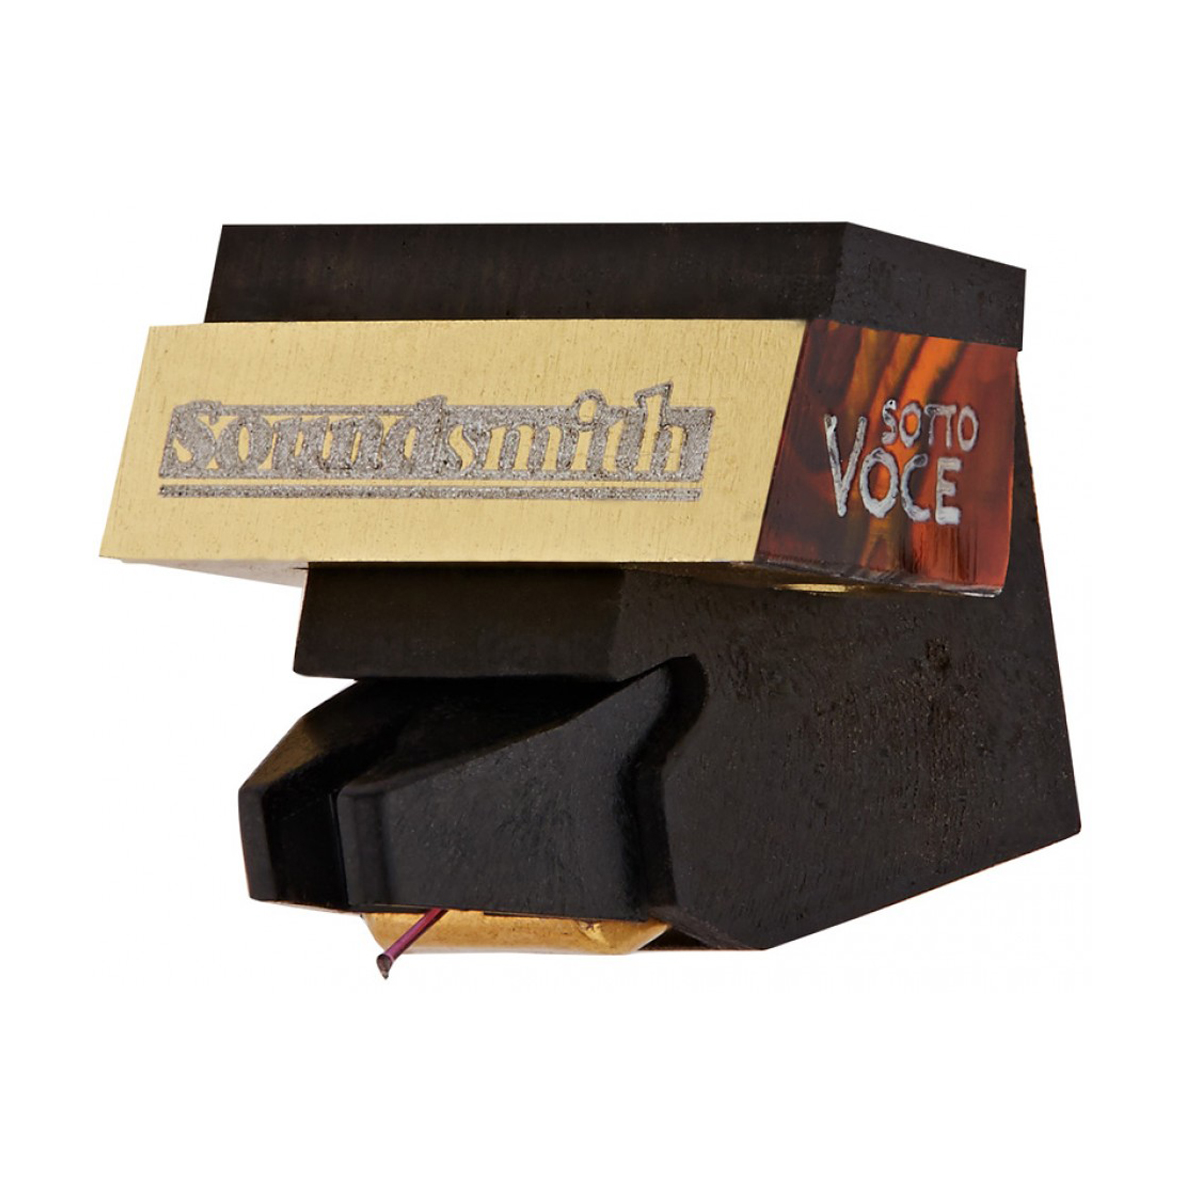 Soundsmith SOTTO VOCE MKII Moving Iron Cartridge